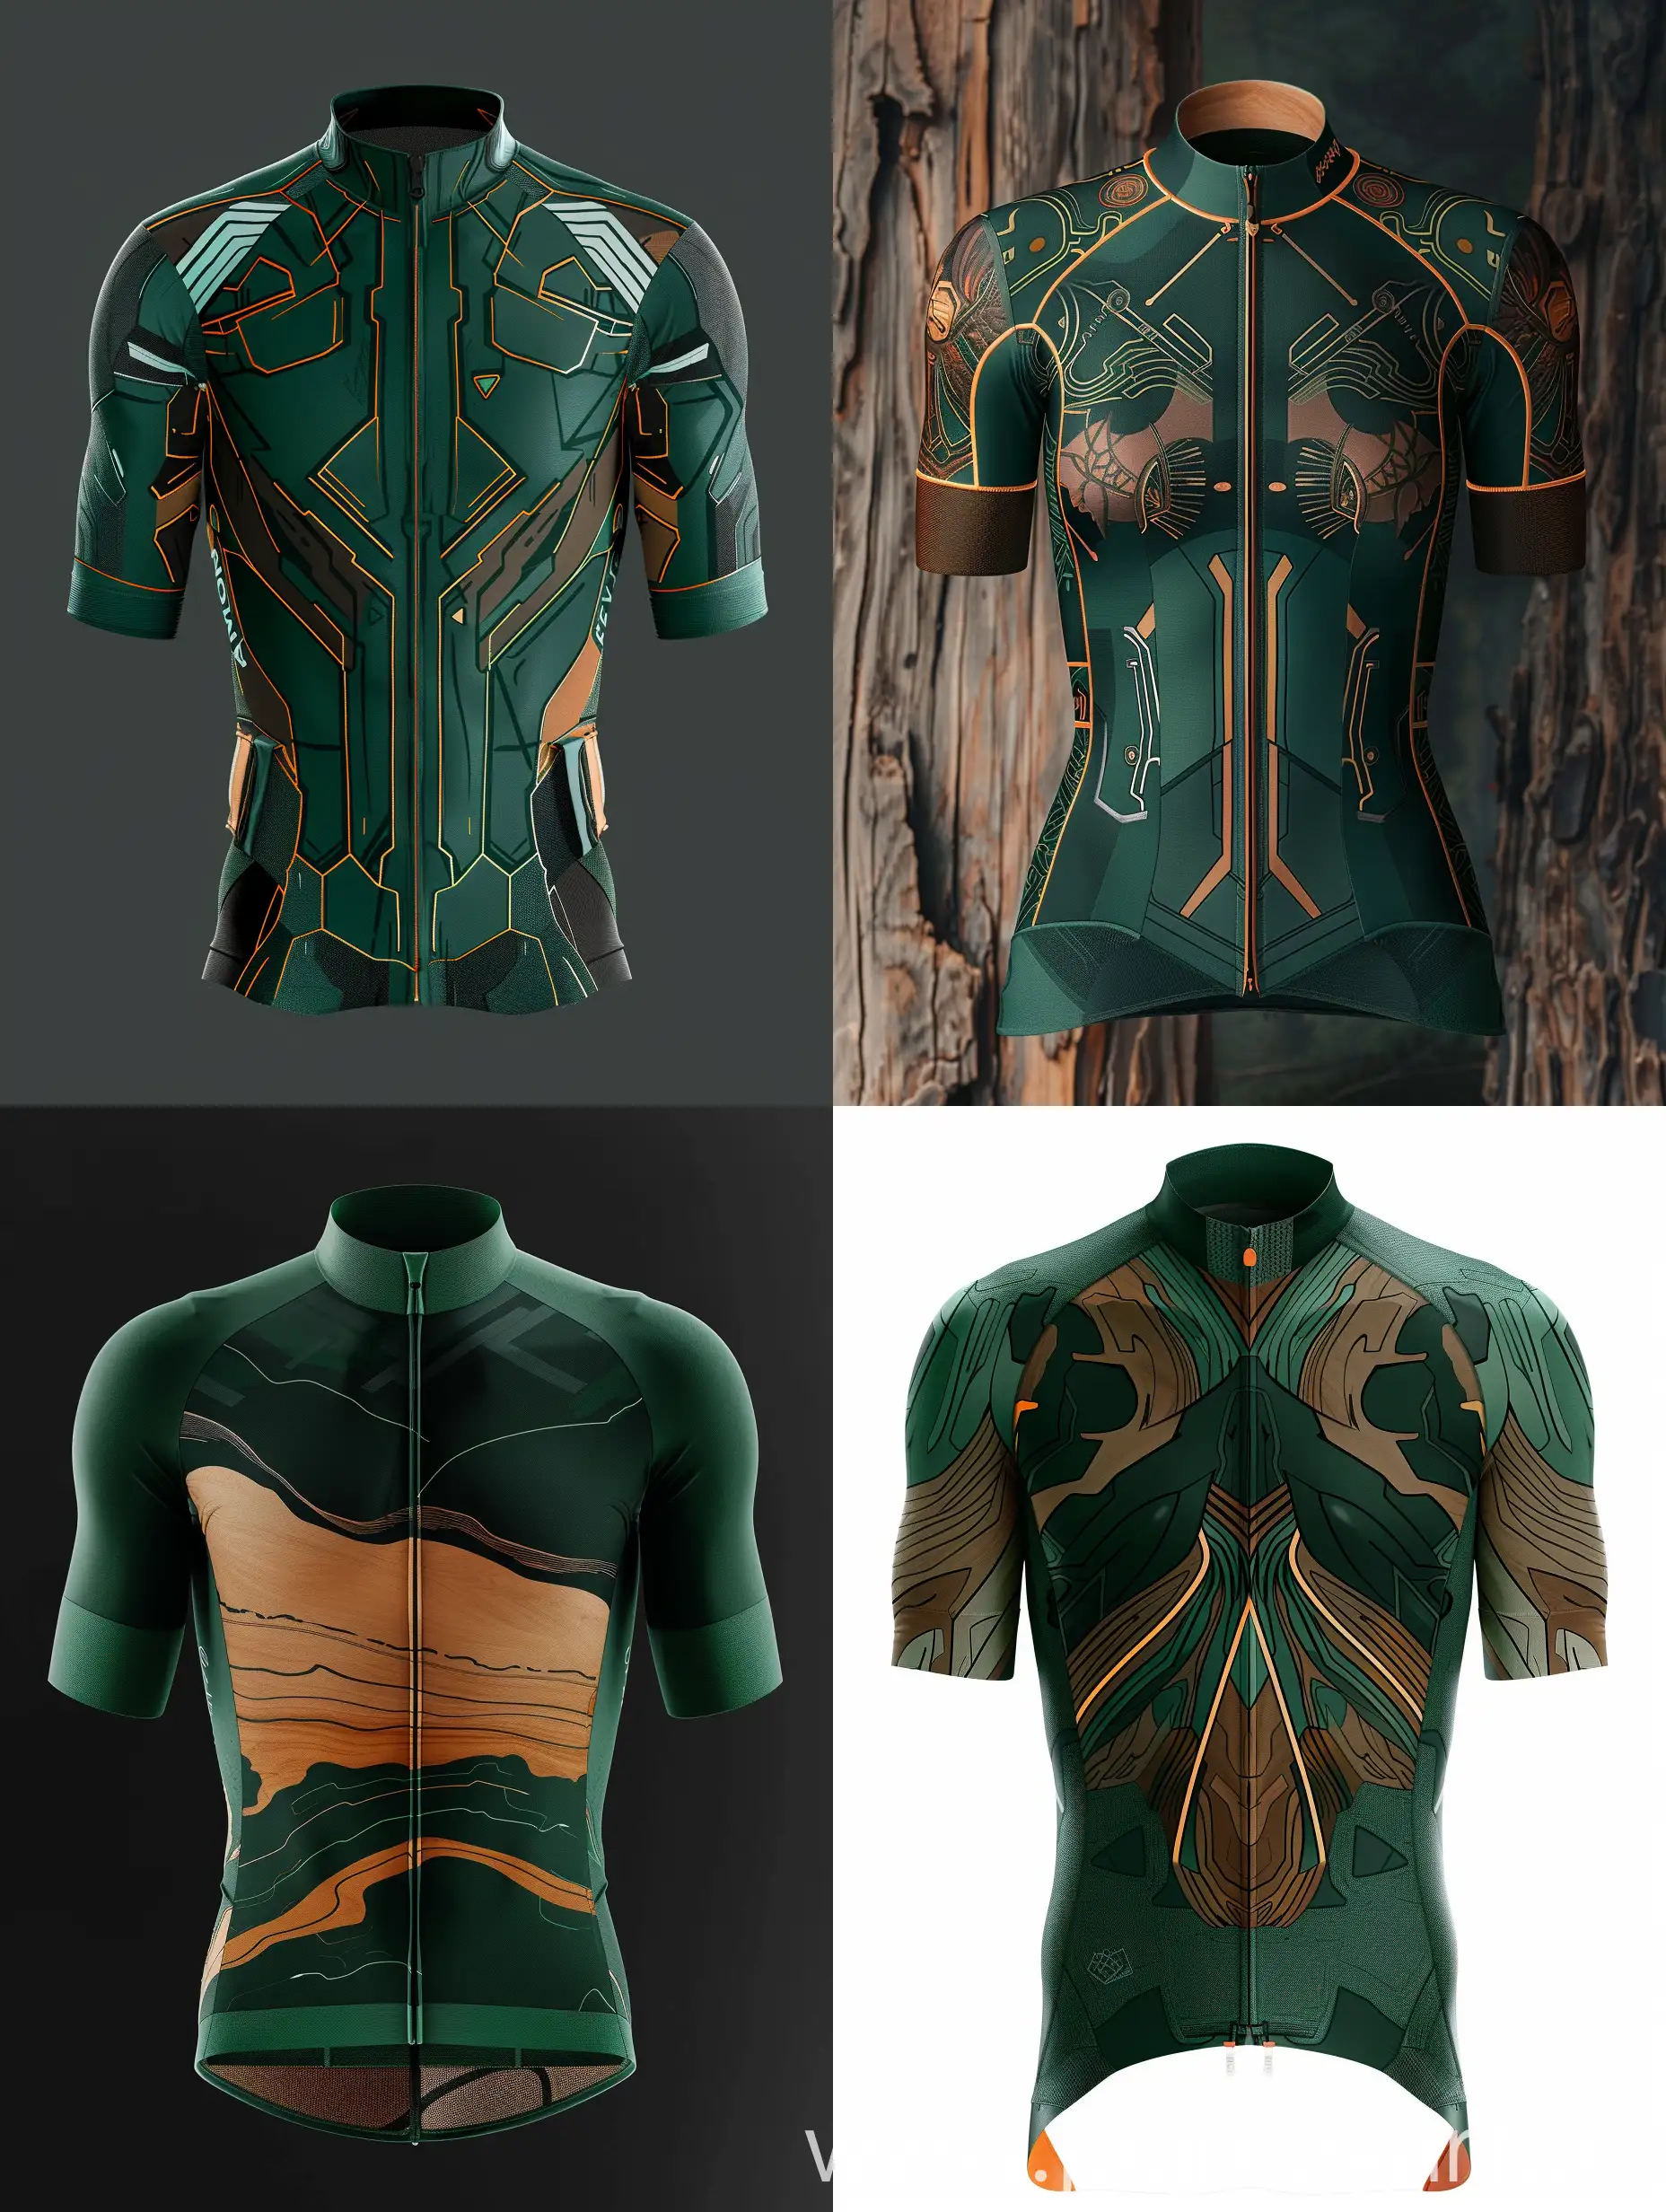 Cycling-Jersey-Design-in-Cybernetic-Style-with-Dark-Green-Green-Wood-Brown-and-Orange-Colors